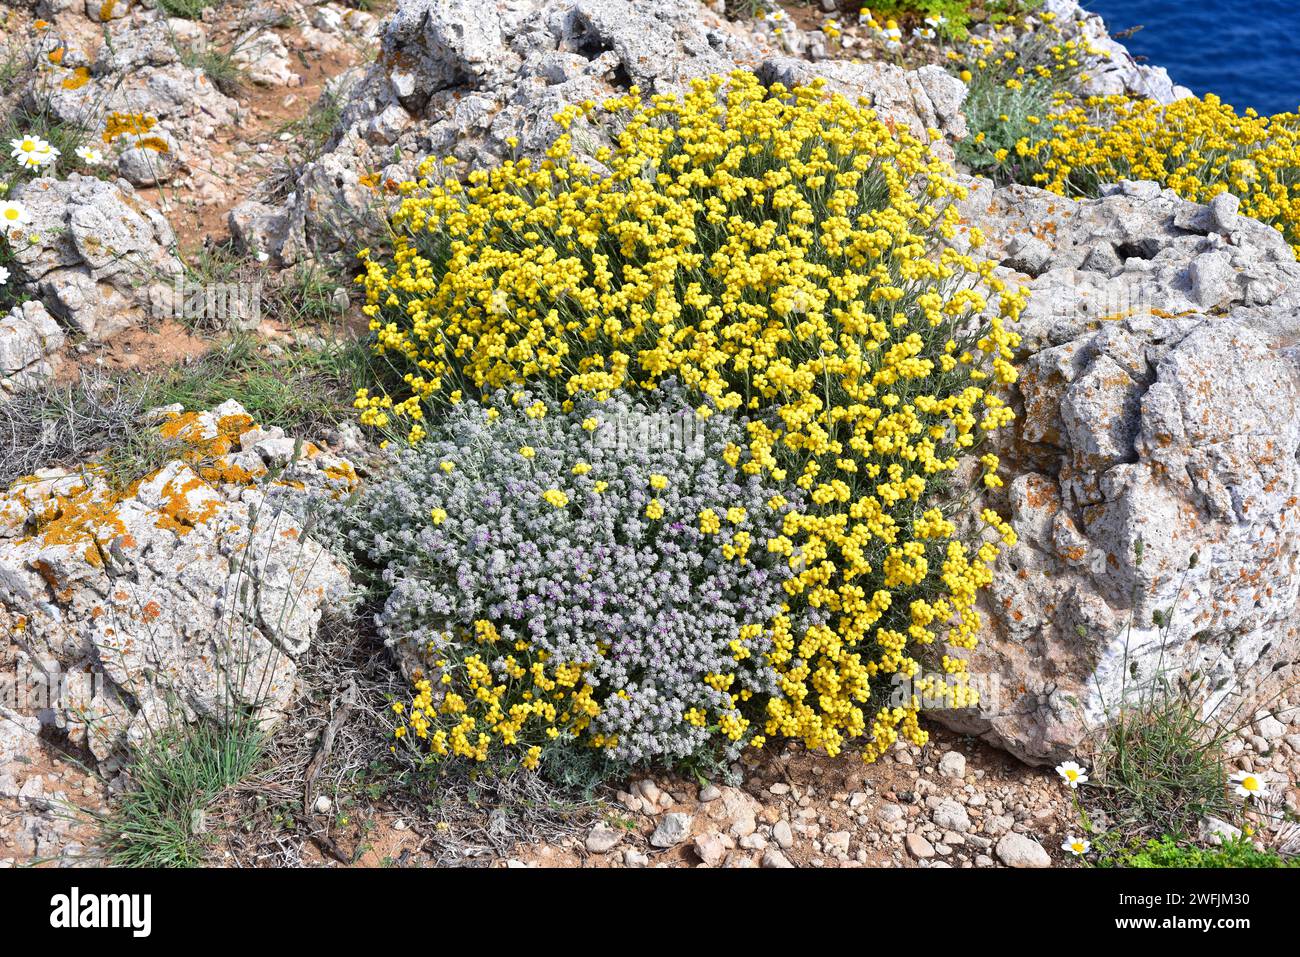 Perpetual, perennial or everlasting (Helichrysum stoechas) is an evergreen shrub native to southern Europe, specially in Iberian Peninsula. In the cen Stock Photo